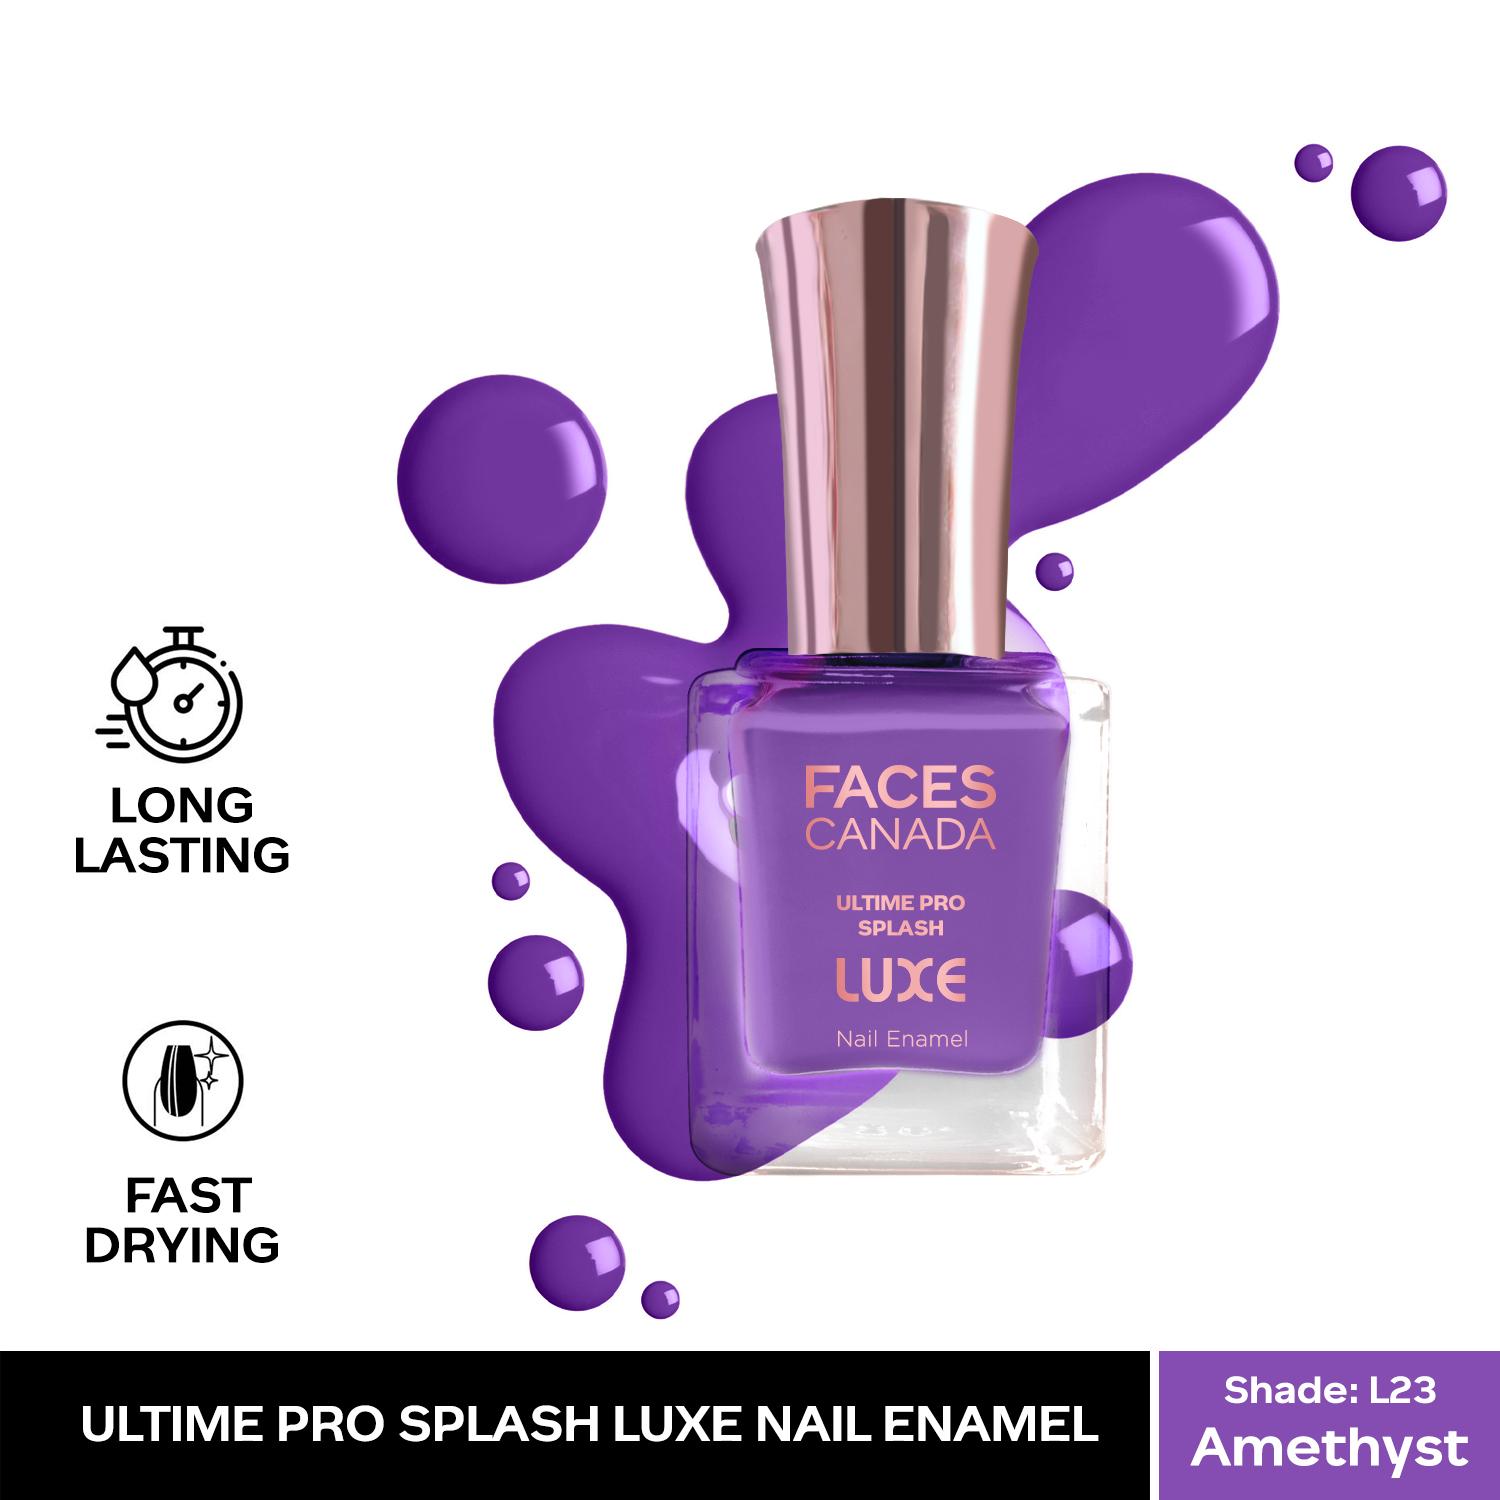 Faces Canada | Faces Canada Ultime Pro Splash Luxe Nail Enamel - Amethyst (L23), Glossy Finish (12 ml)